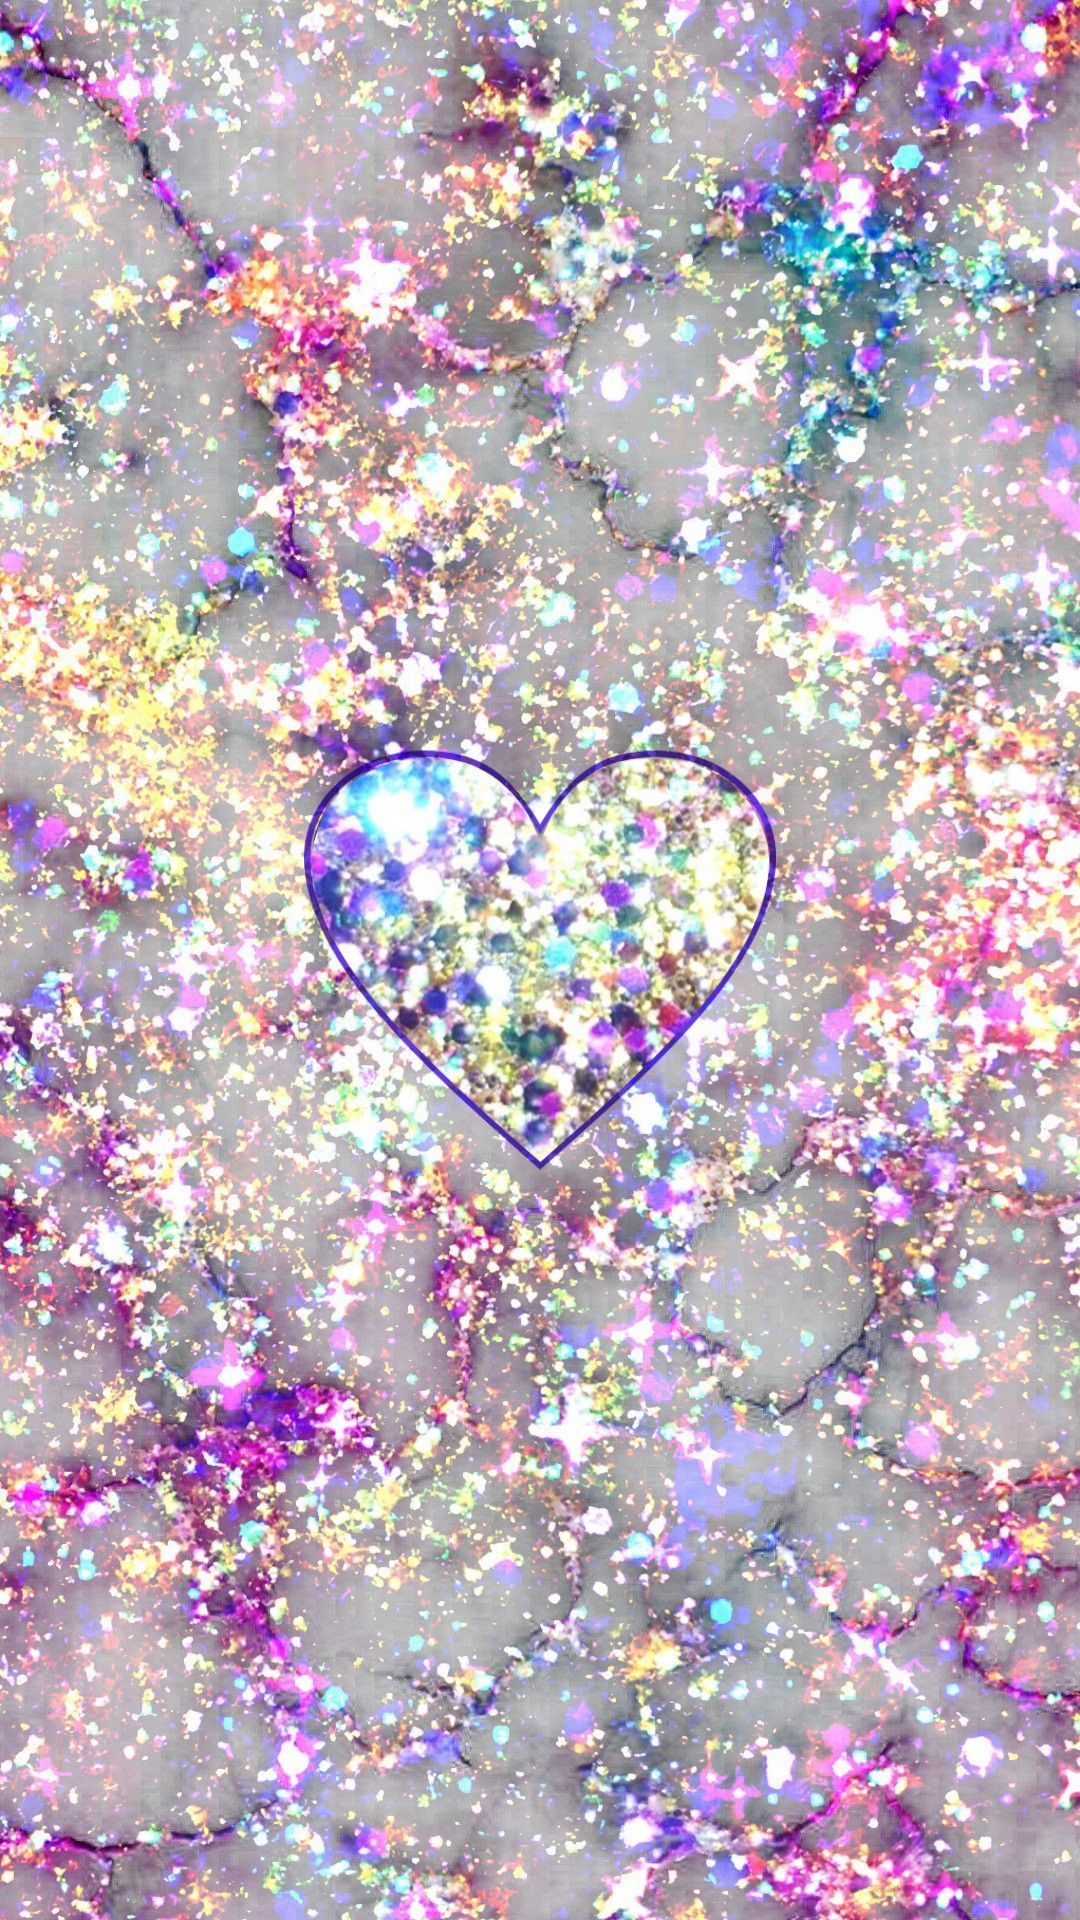 Glittery Marble Heart, made by me #purple #sparkly #wallpaper #background #sparkles #rai. iPhone wallpaper glitter, Heart iphone wallpaper, Pink wallpaper heart